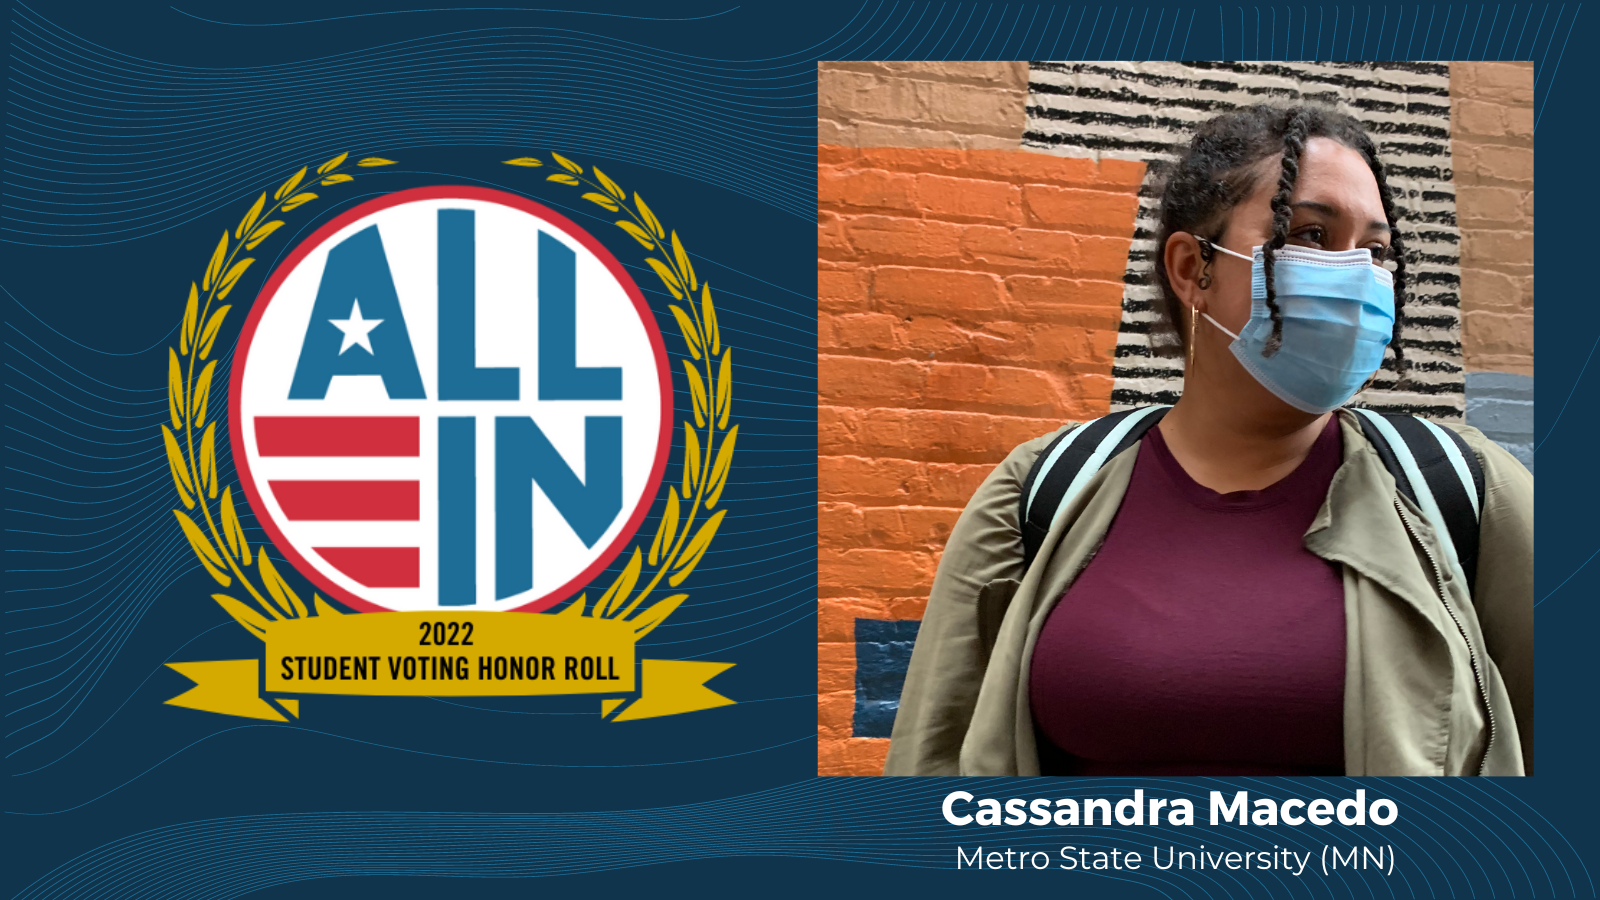 The ALL IN 2022 Student Voting Honor Roll logo on a blue background next to a picture of a woman wearing a medical mask standing in front of a brick wall